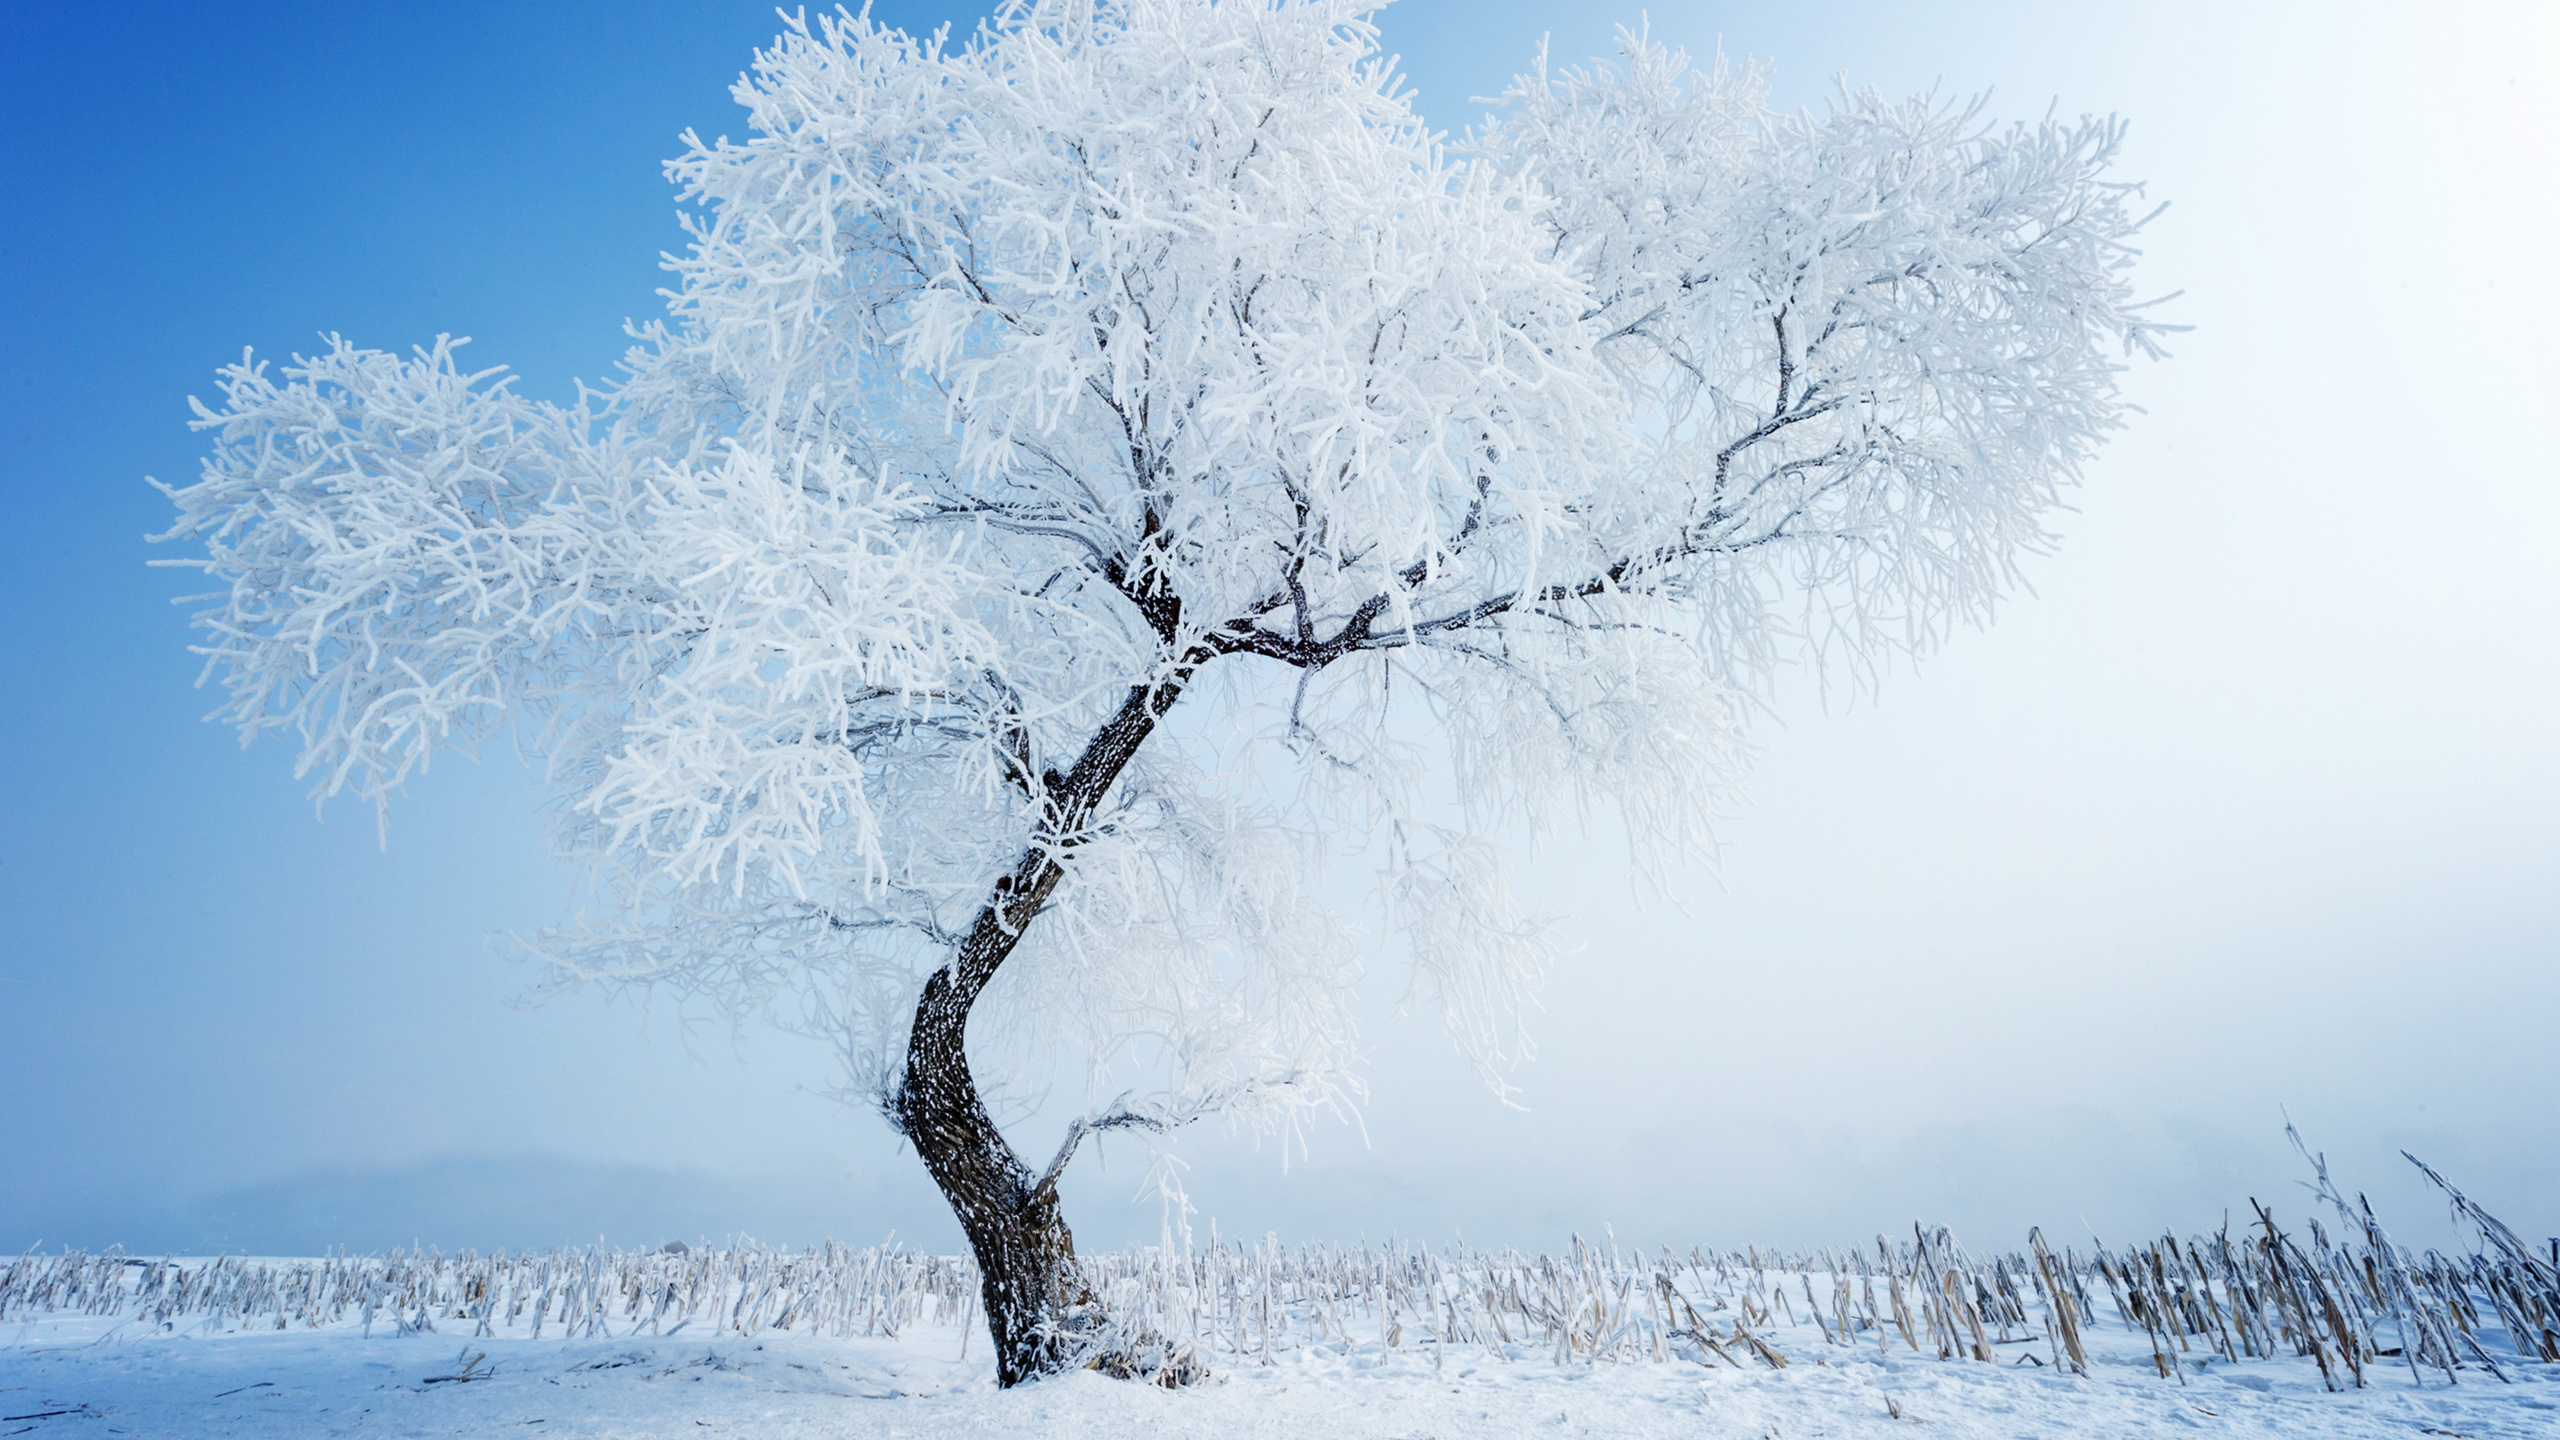 Snow Covered Bare Tree During Daytime. Wallpaper in 2560x1440 Resolution